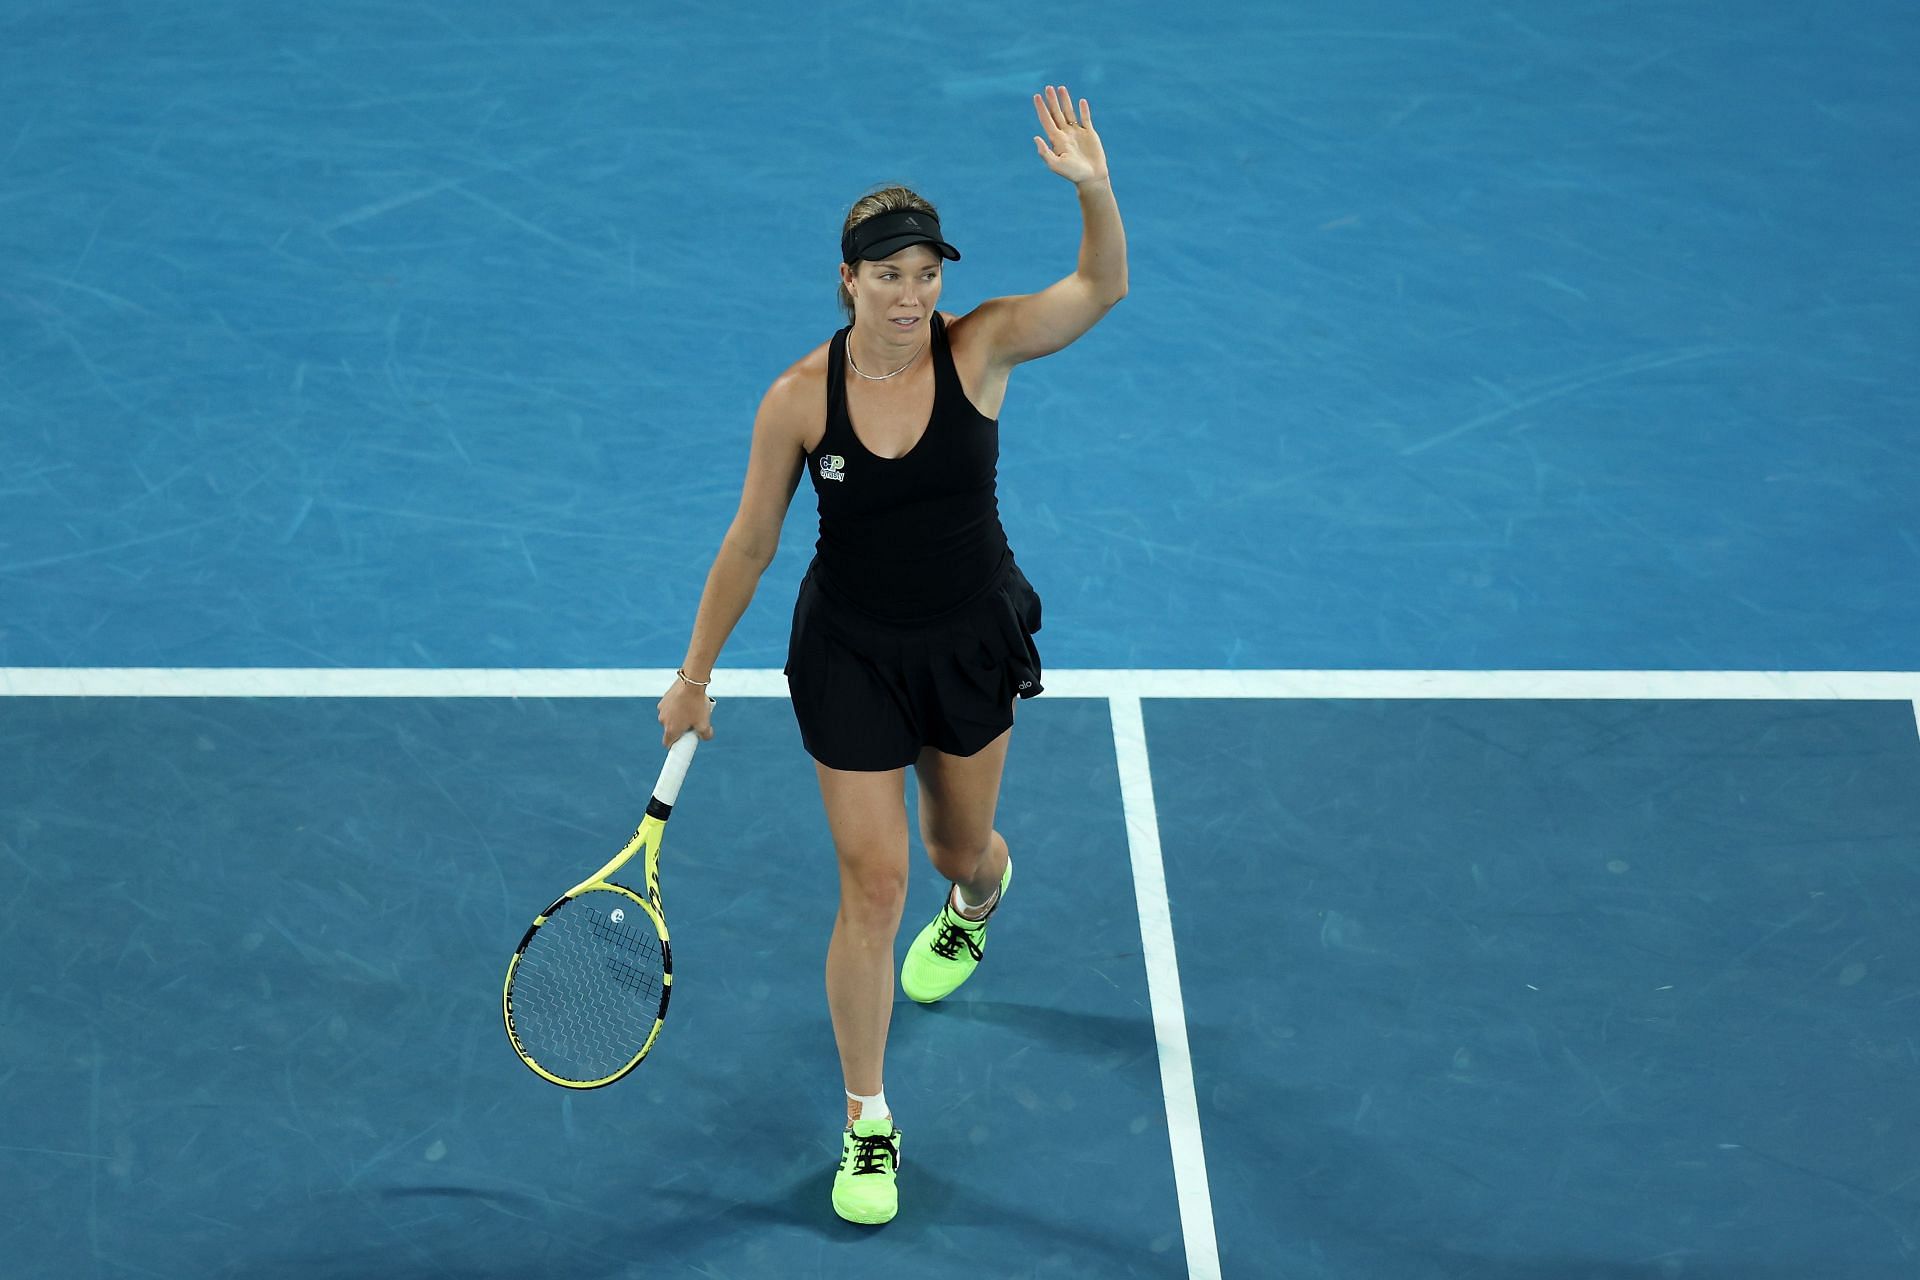 Danielle Collins squares off against Ashleigh Barty in the final of the 2022 Australian Open